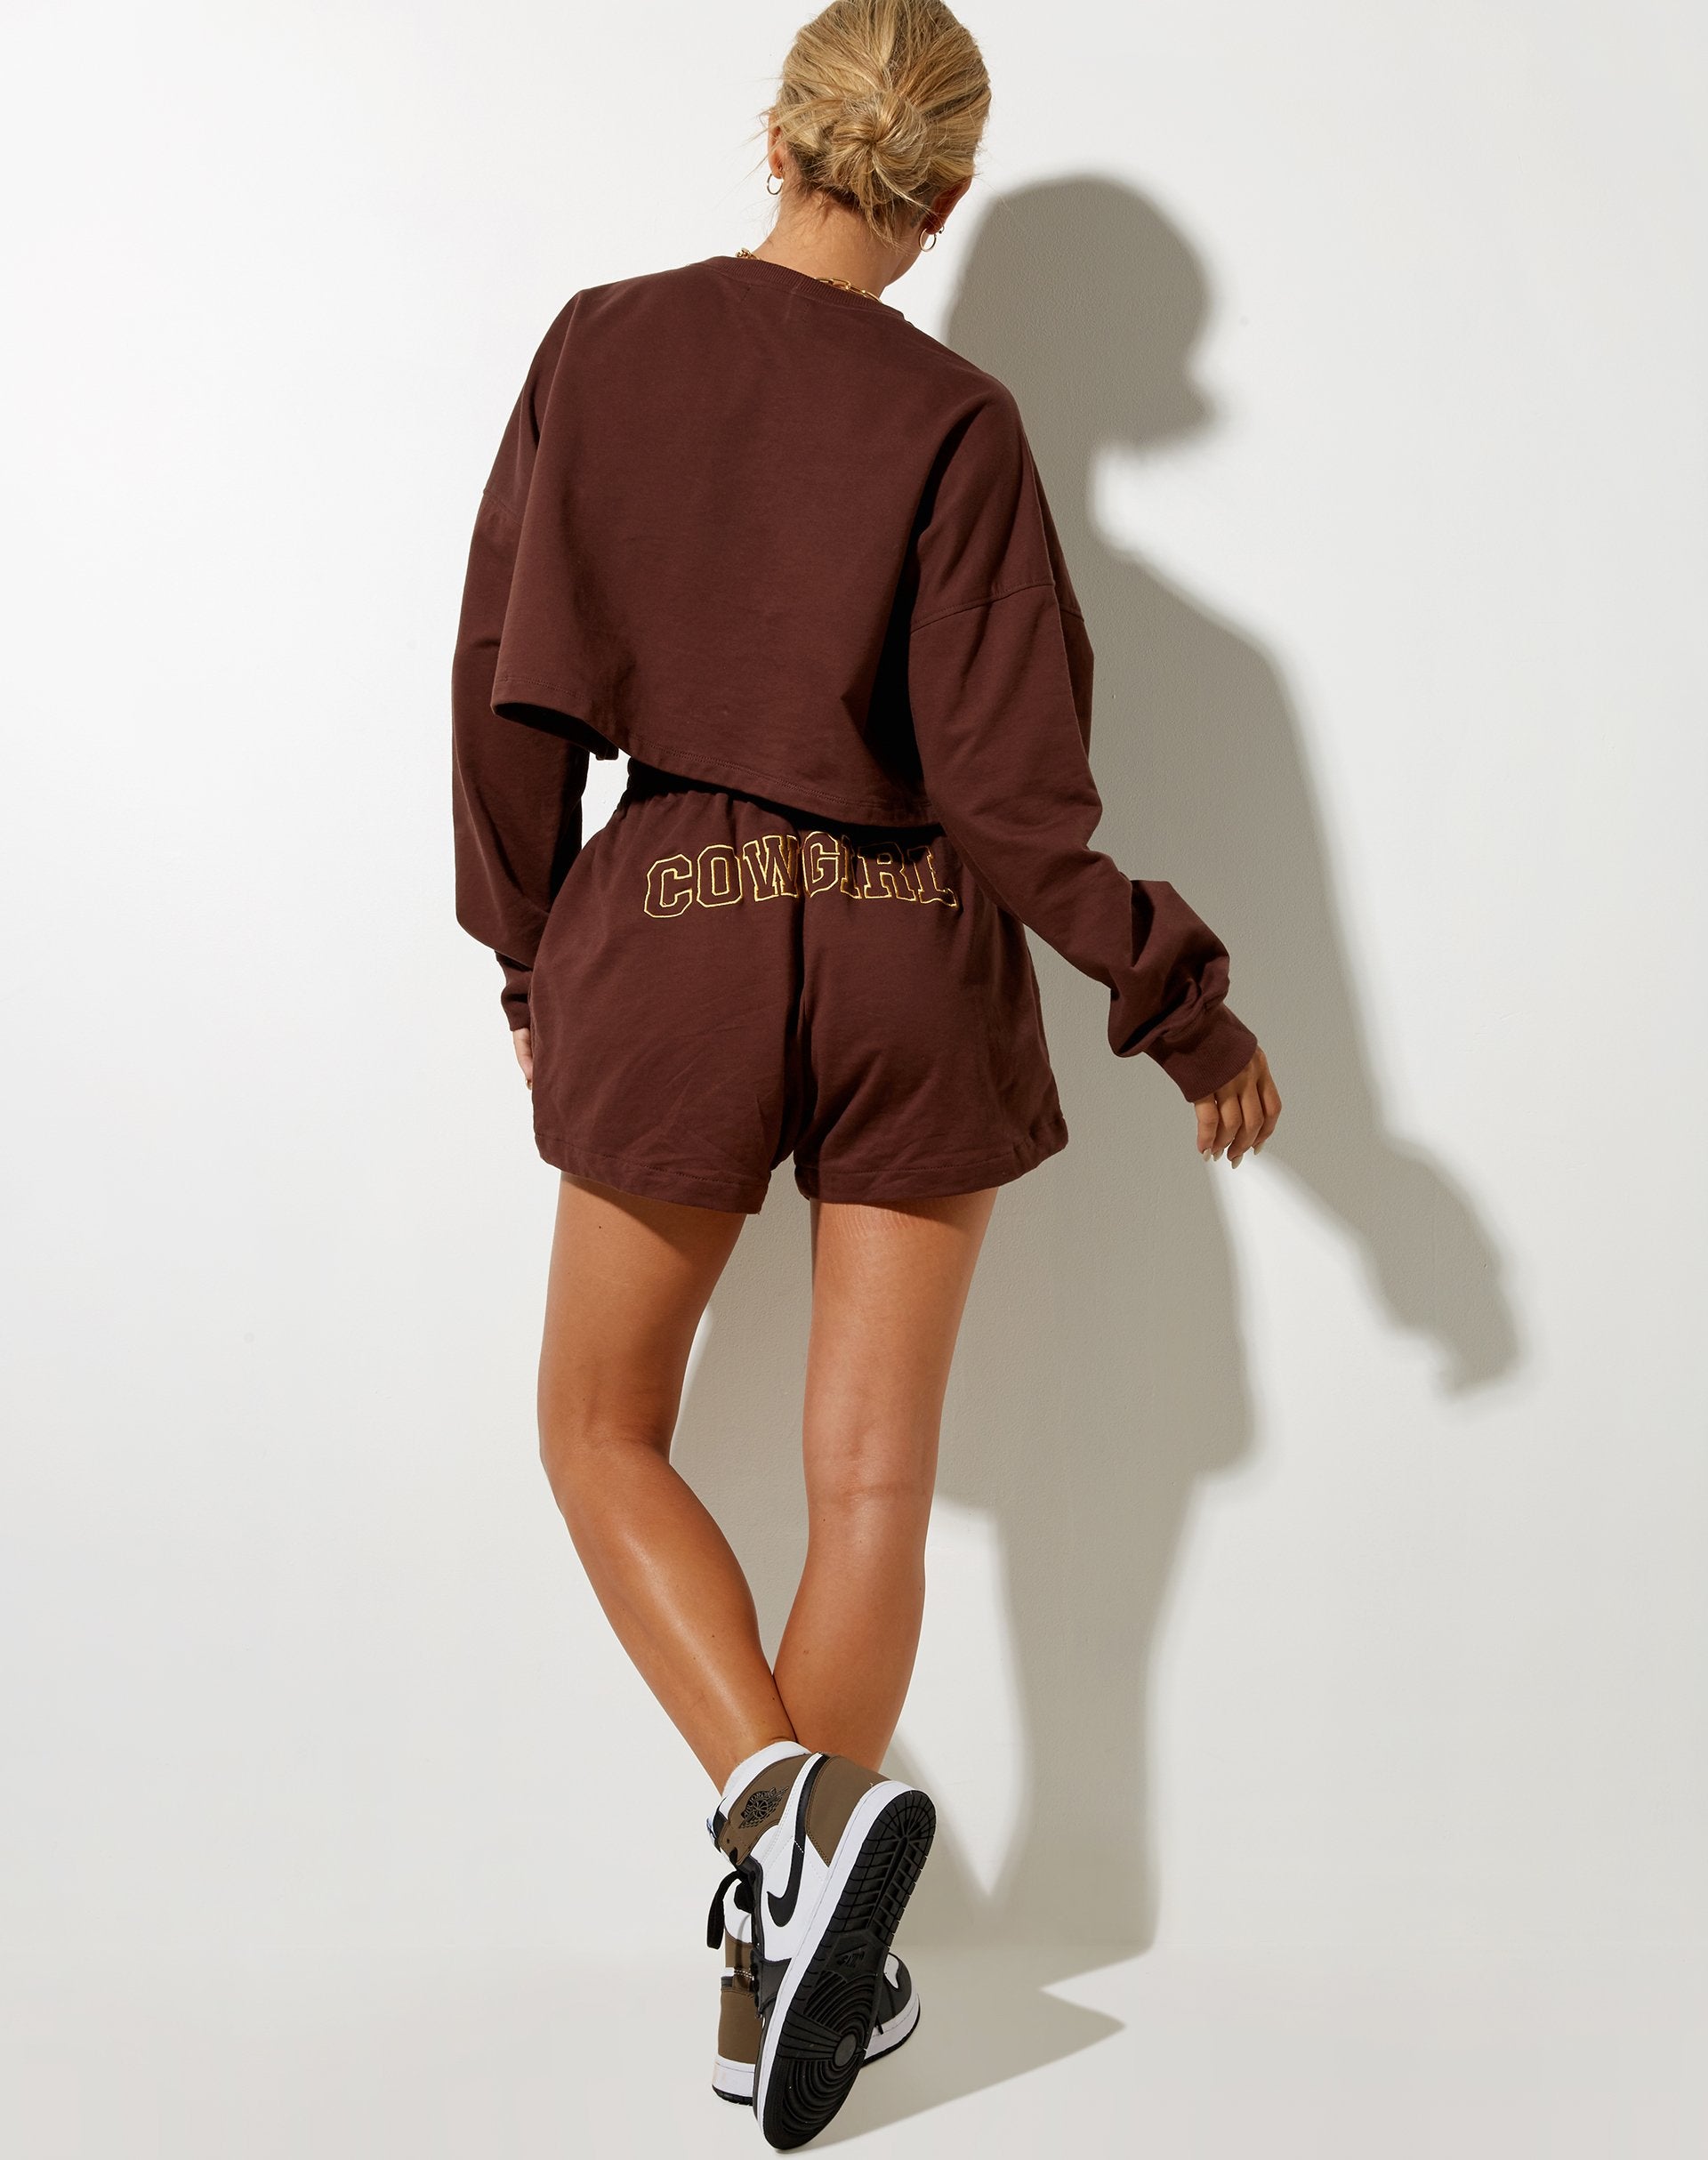 Image of Fawly Crop Top in Deep Mahogany Cowgirl Embro